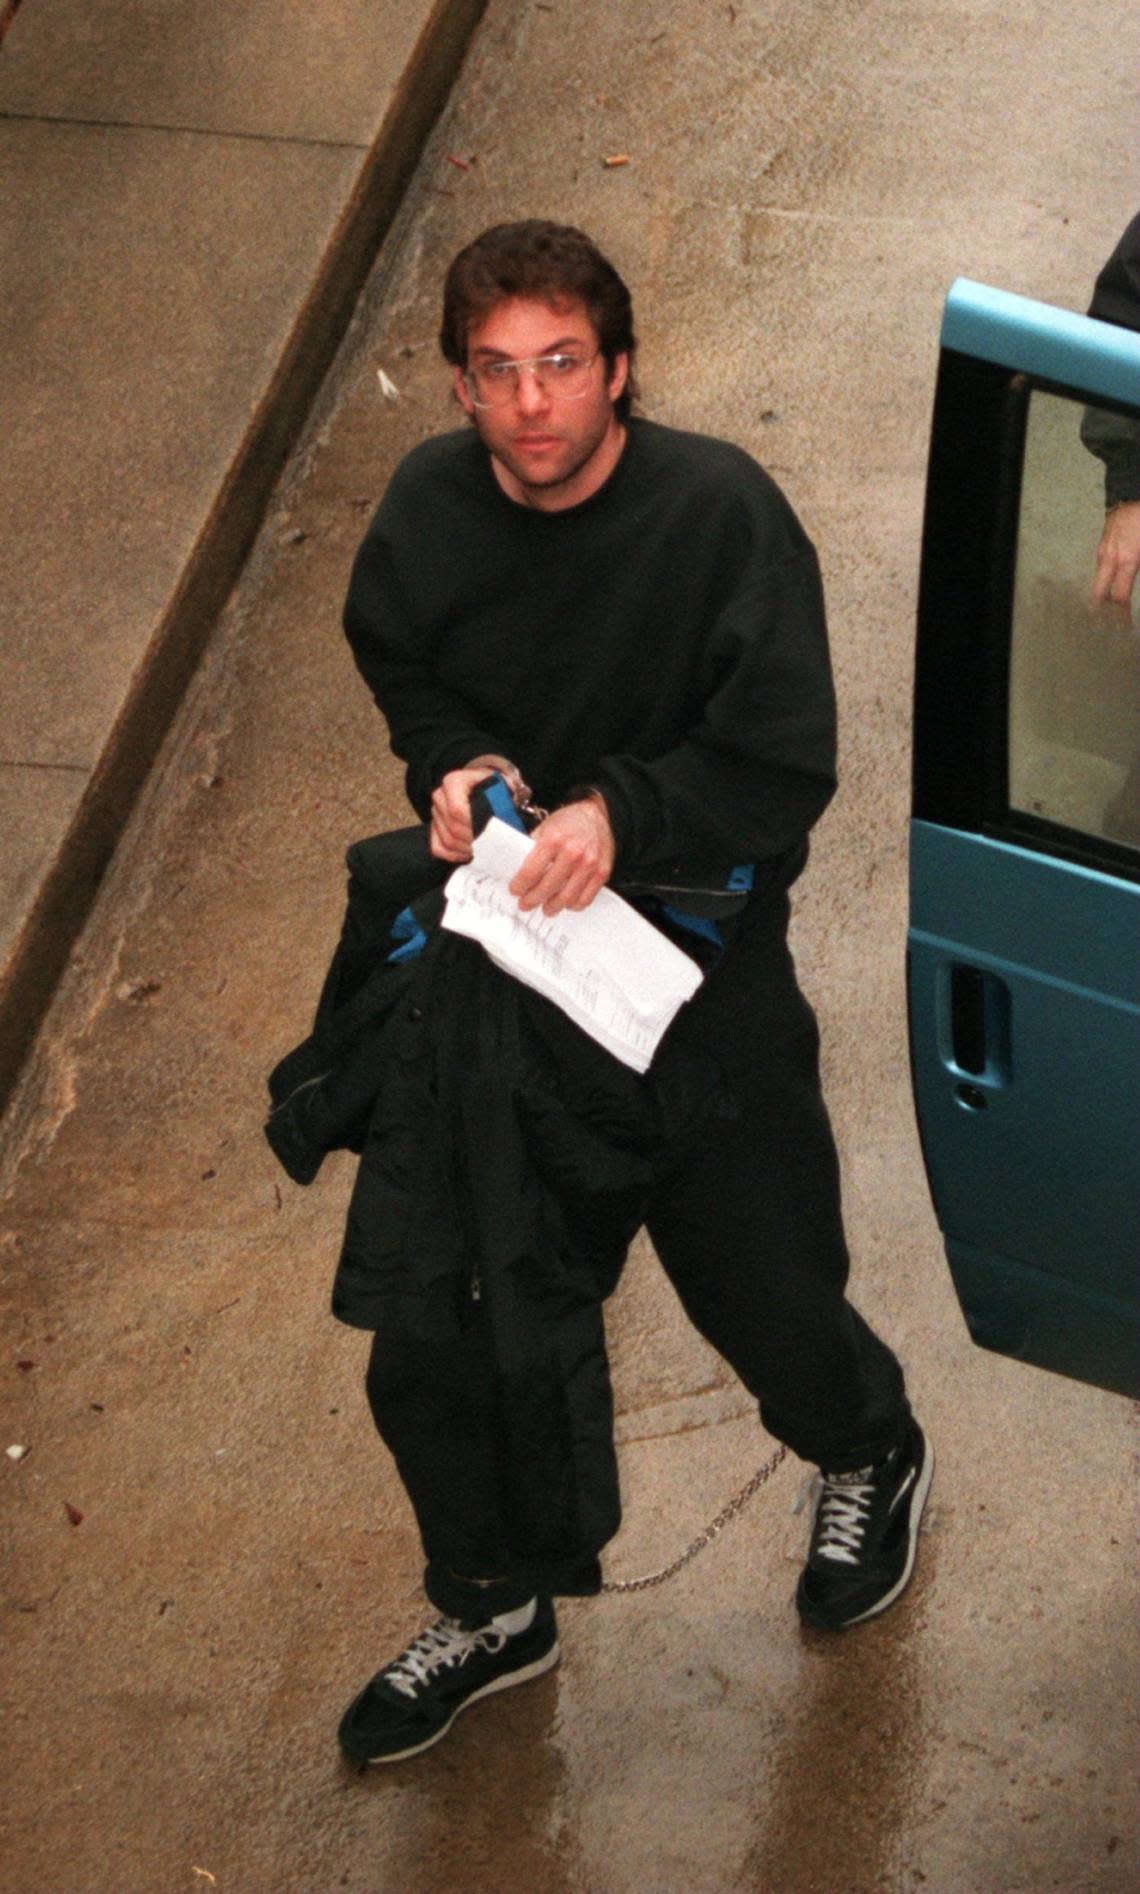 Kevin Mitnick, suspected computer hacker, makes his entrance at the US Courthouse in Raleigh in 1995 on charges of hacking.